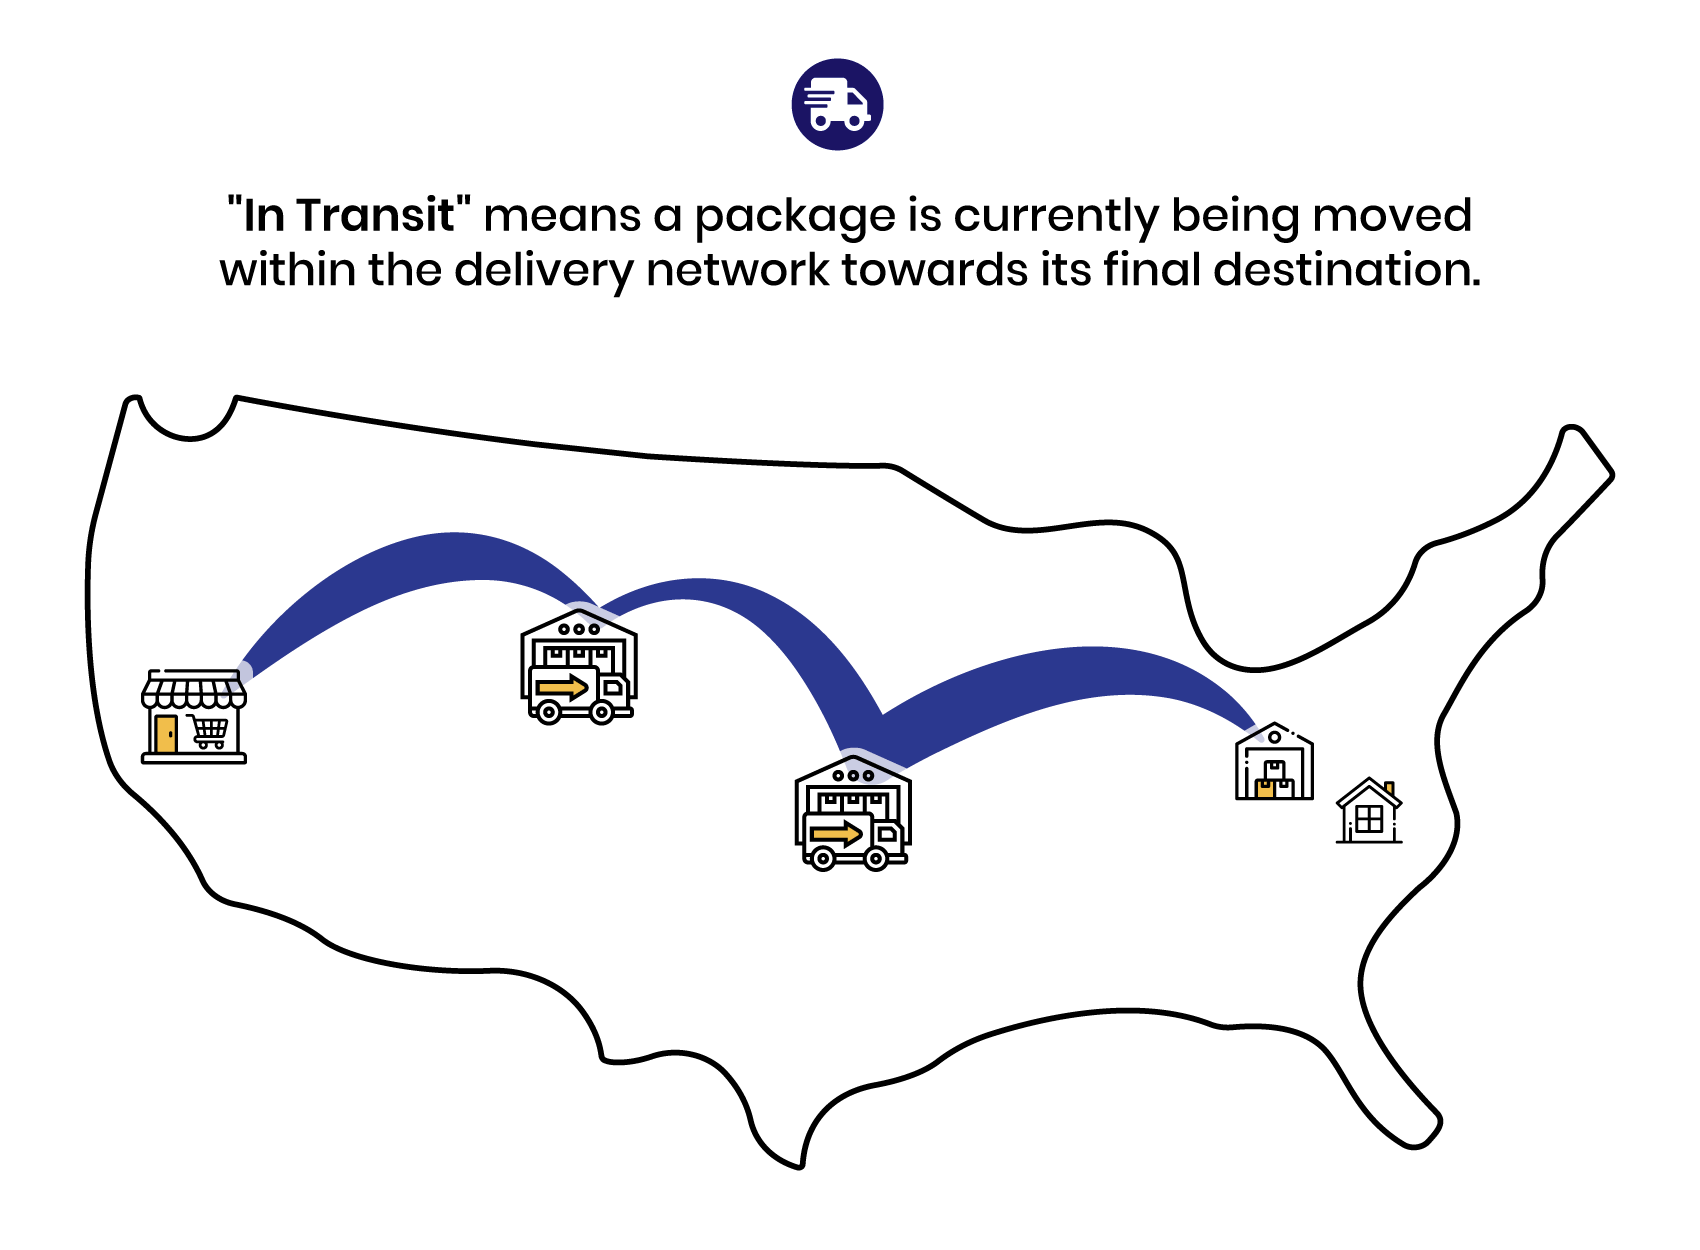 In transit means a package being moved within the carrier delivery network towards its destination